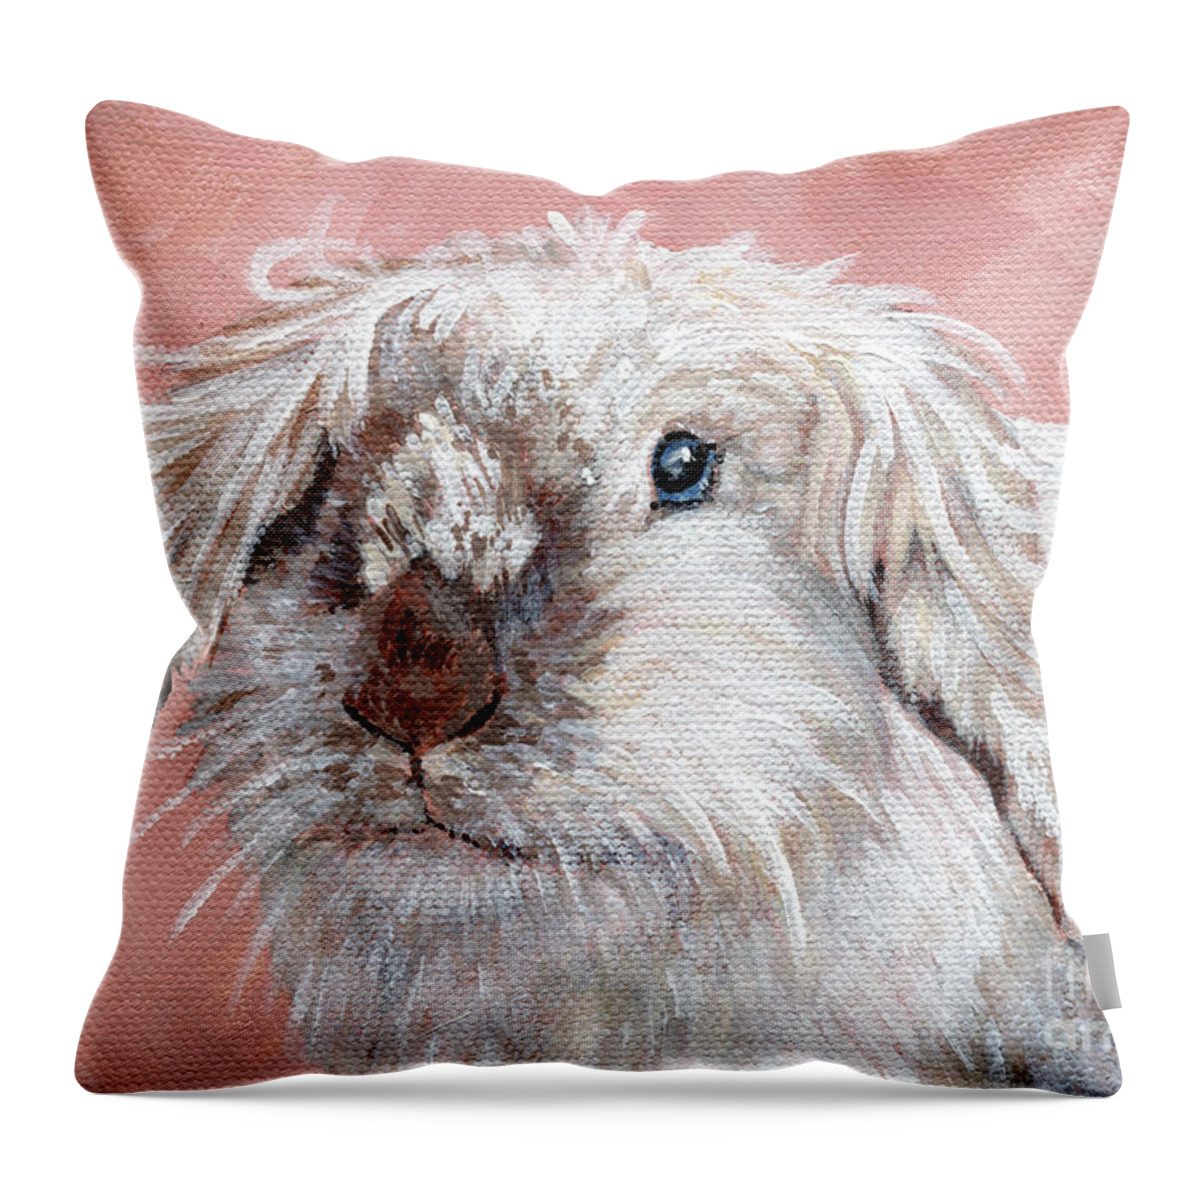 Rabbit Painting Throw Pillow featuring the painting Marshmallow - Bunny Painting by Annie Troe